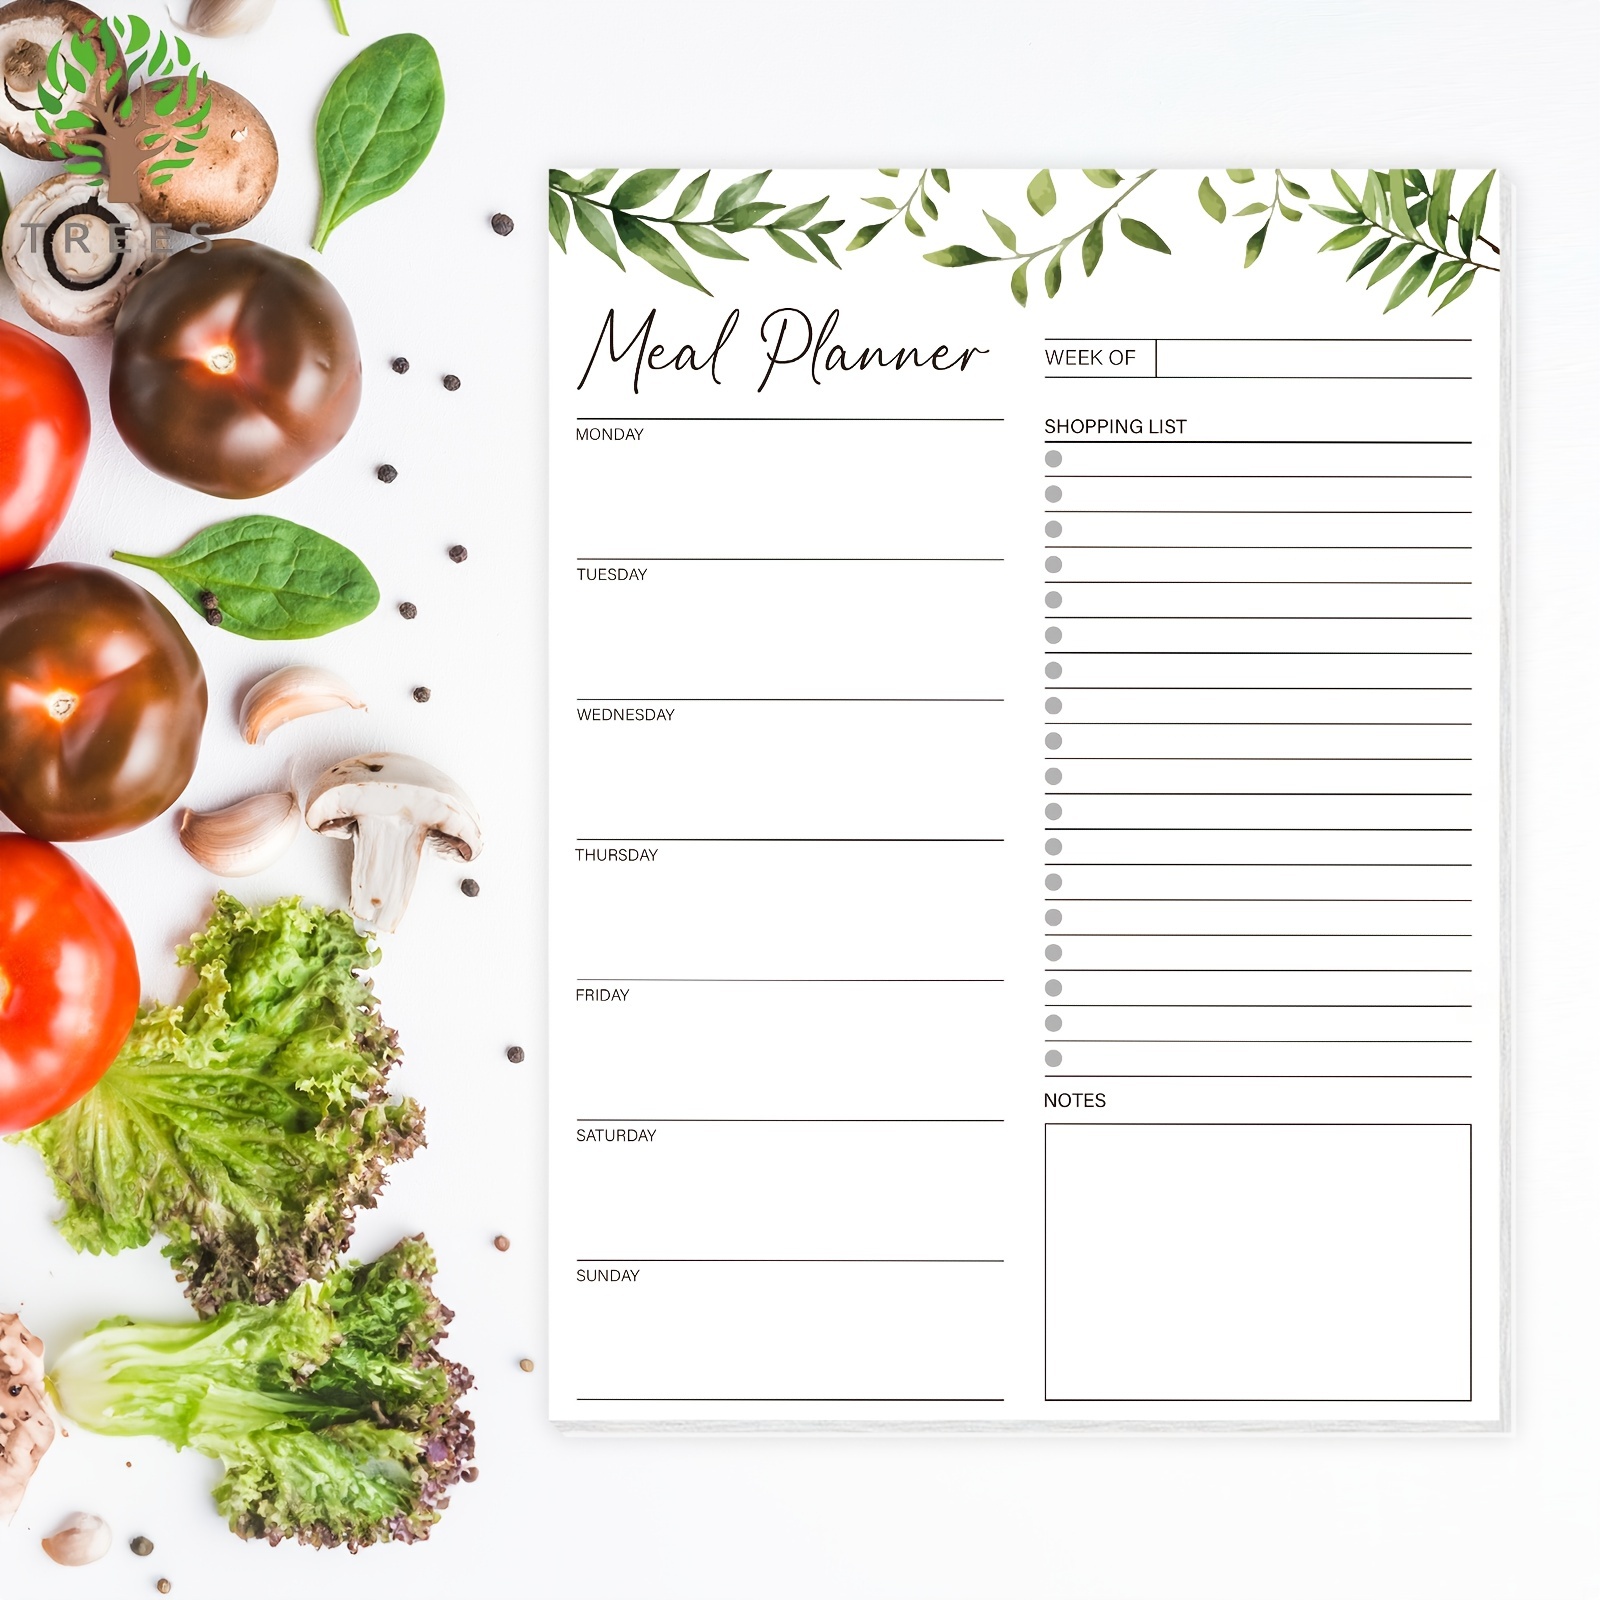 

Trees Magnetic Weekly Meal Planner Notepad For Fridge 52 Undated Tear-off Sheets 8.5"*6.5" Meal Planning Pad Notebook With Shopping List For Kitchen